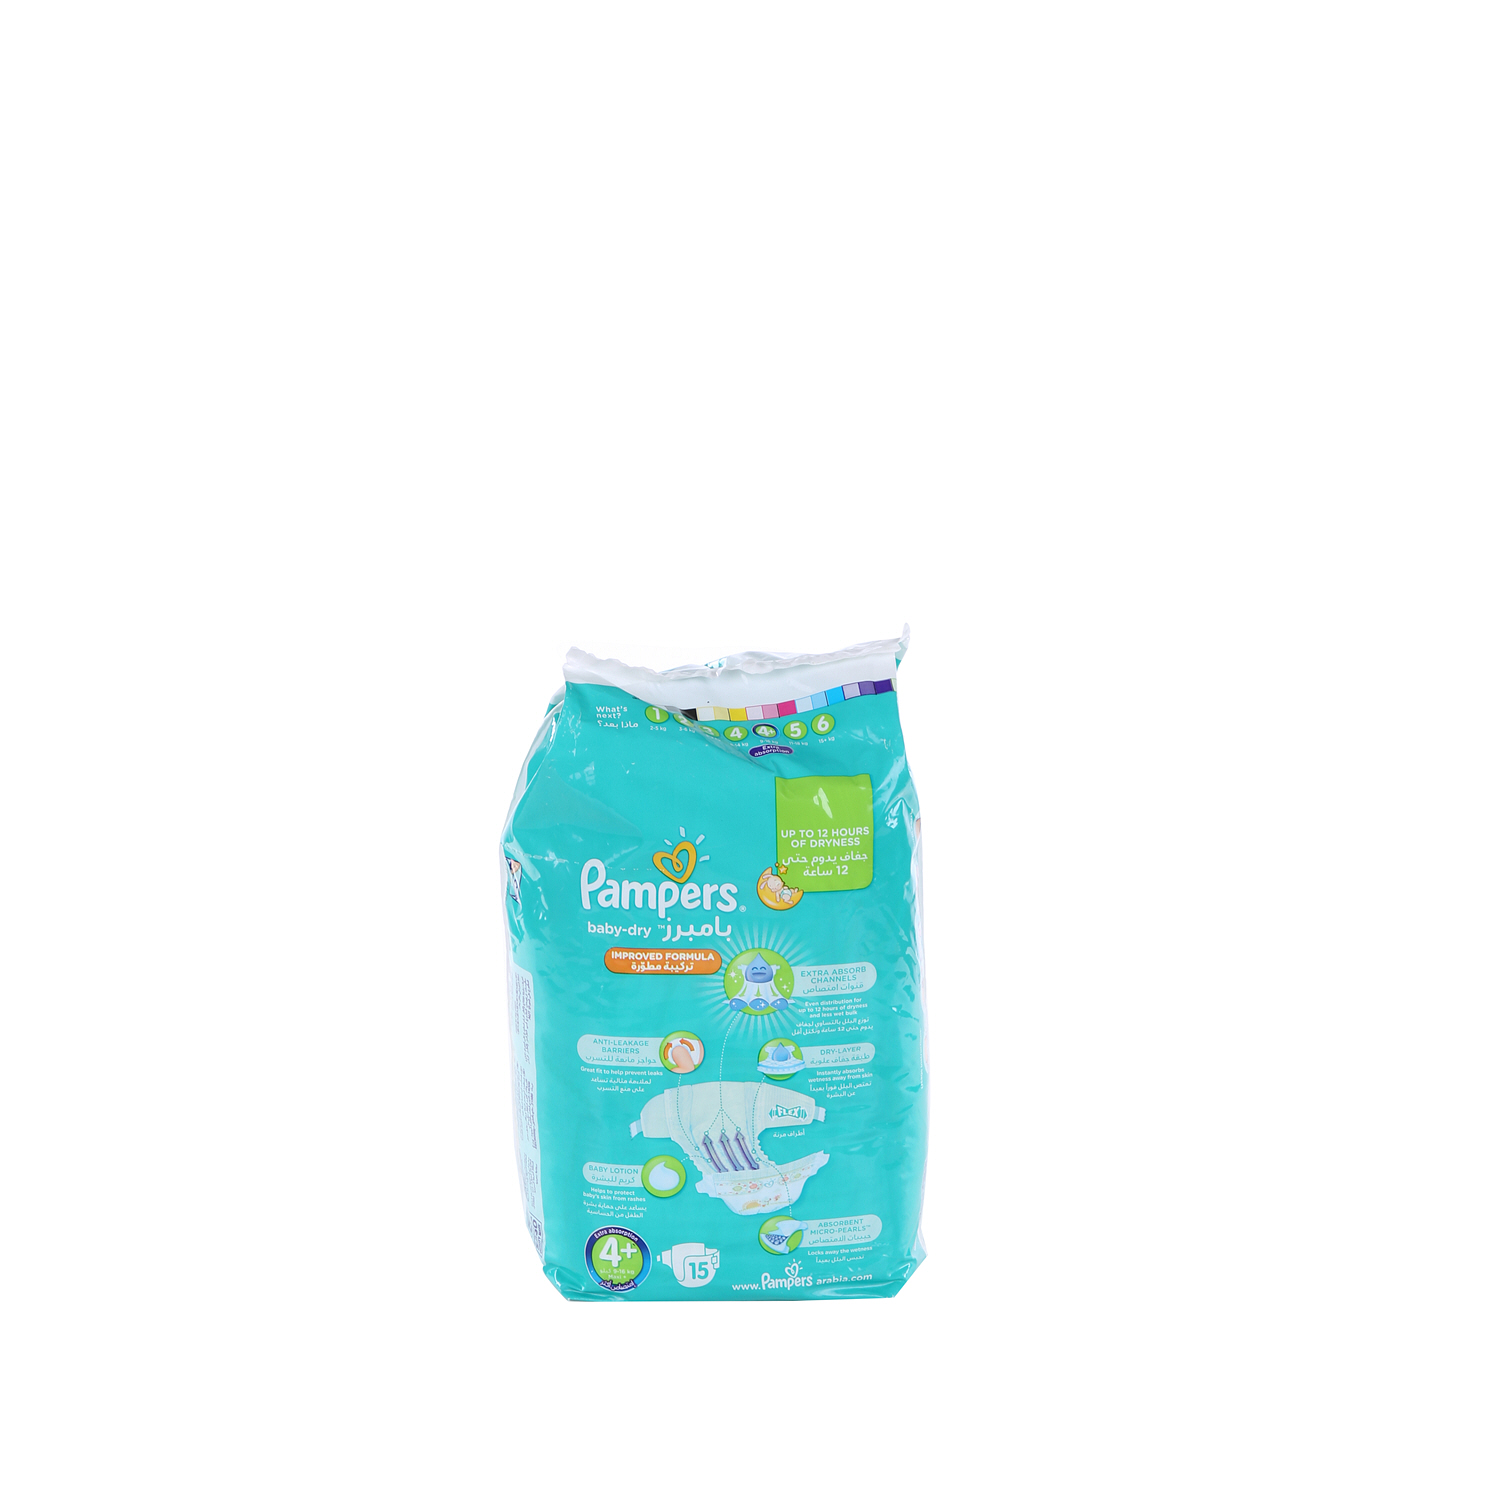 Pampers Baby Dry Pack Junior 15'S